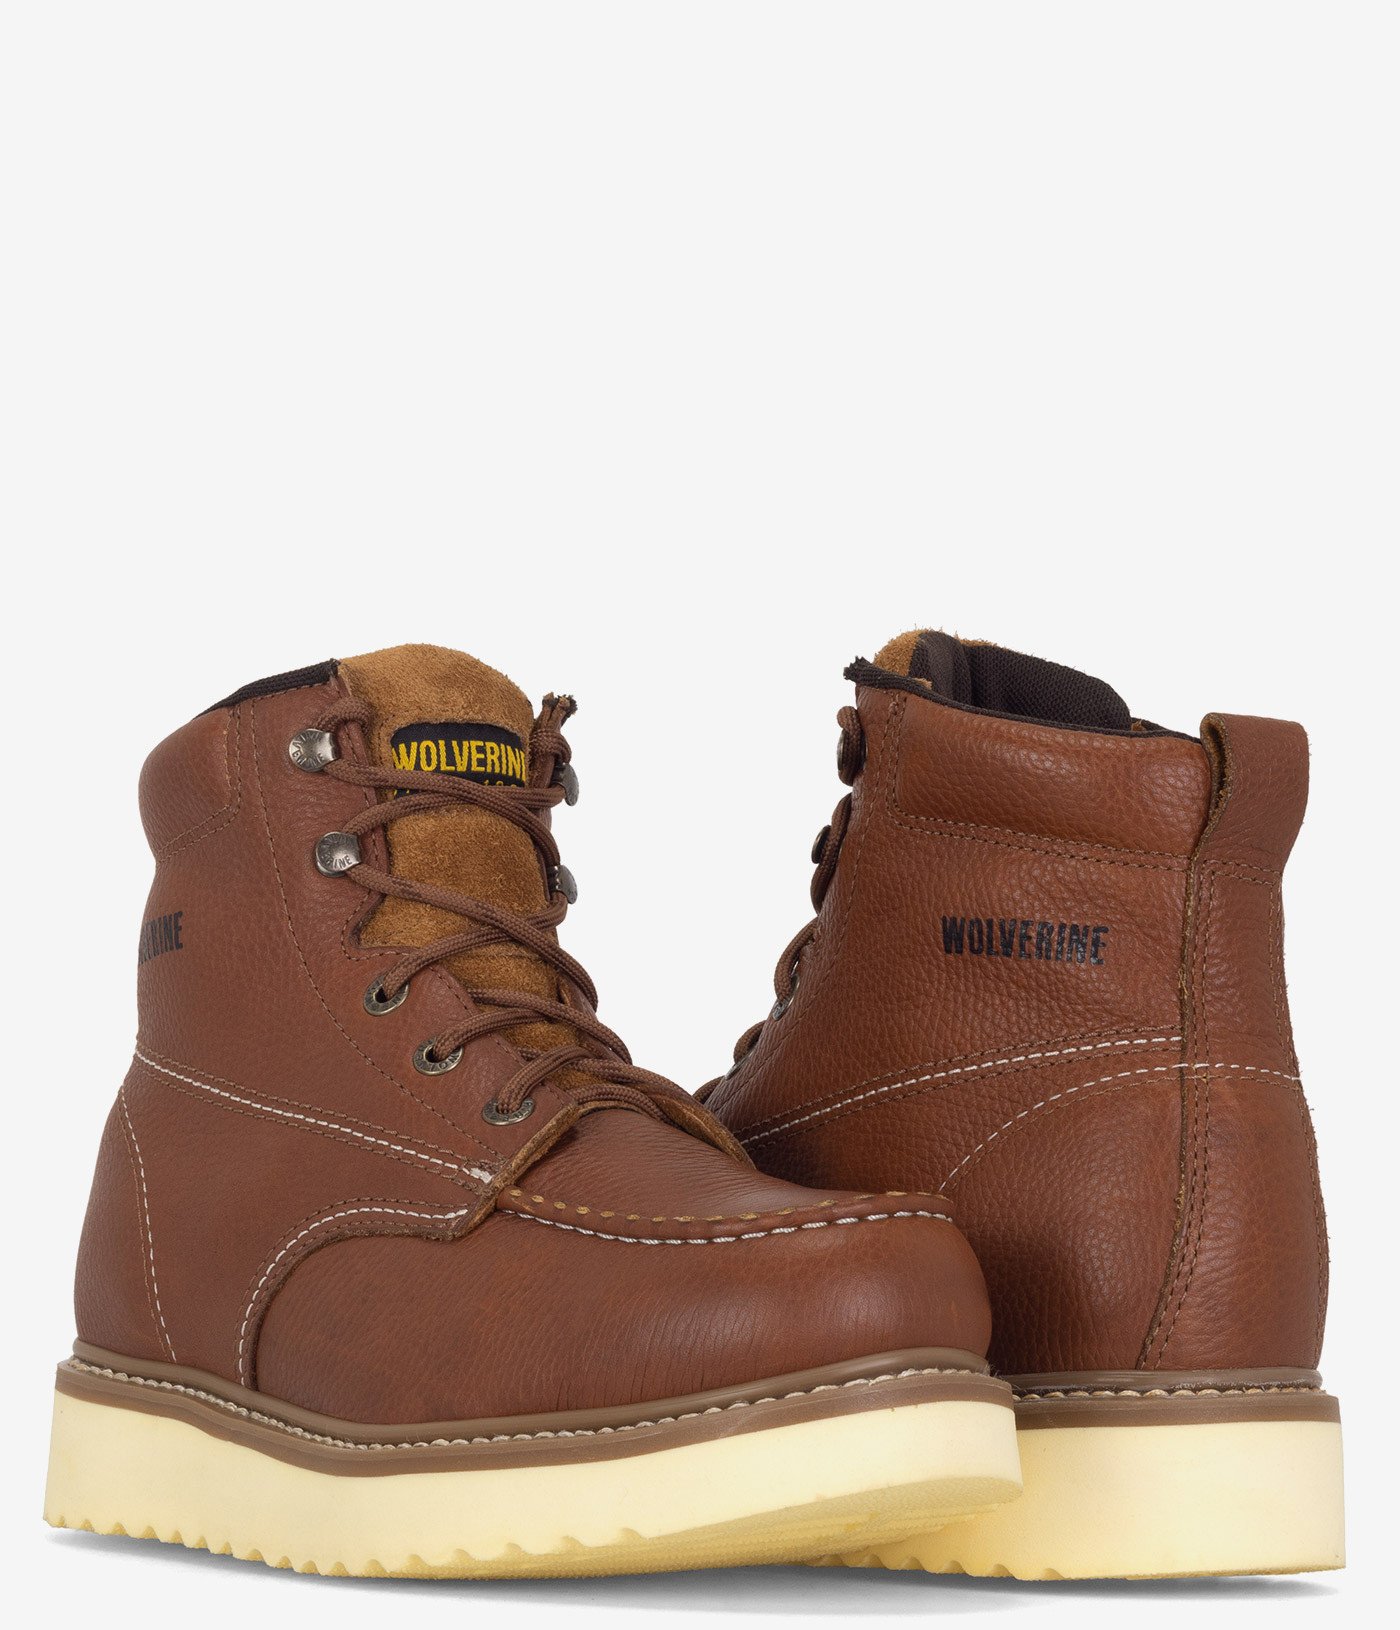 Wolverine Moc-Toe 6" Wedge Boot